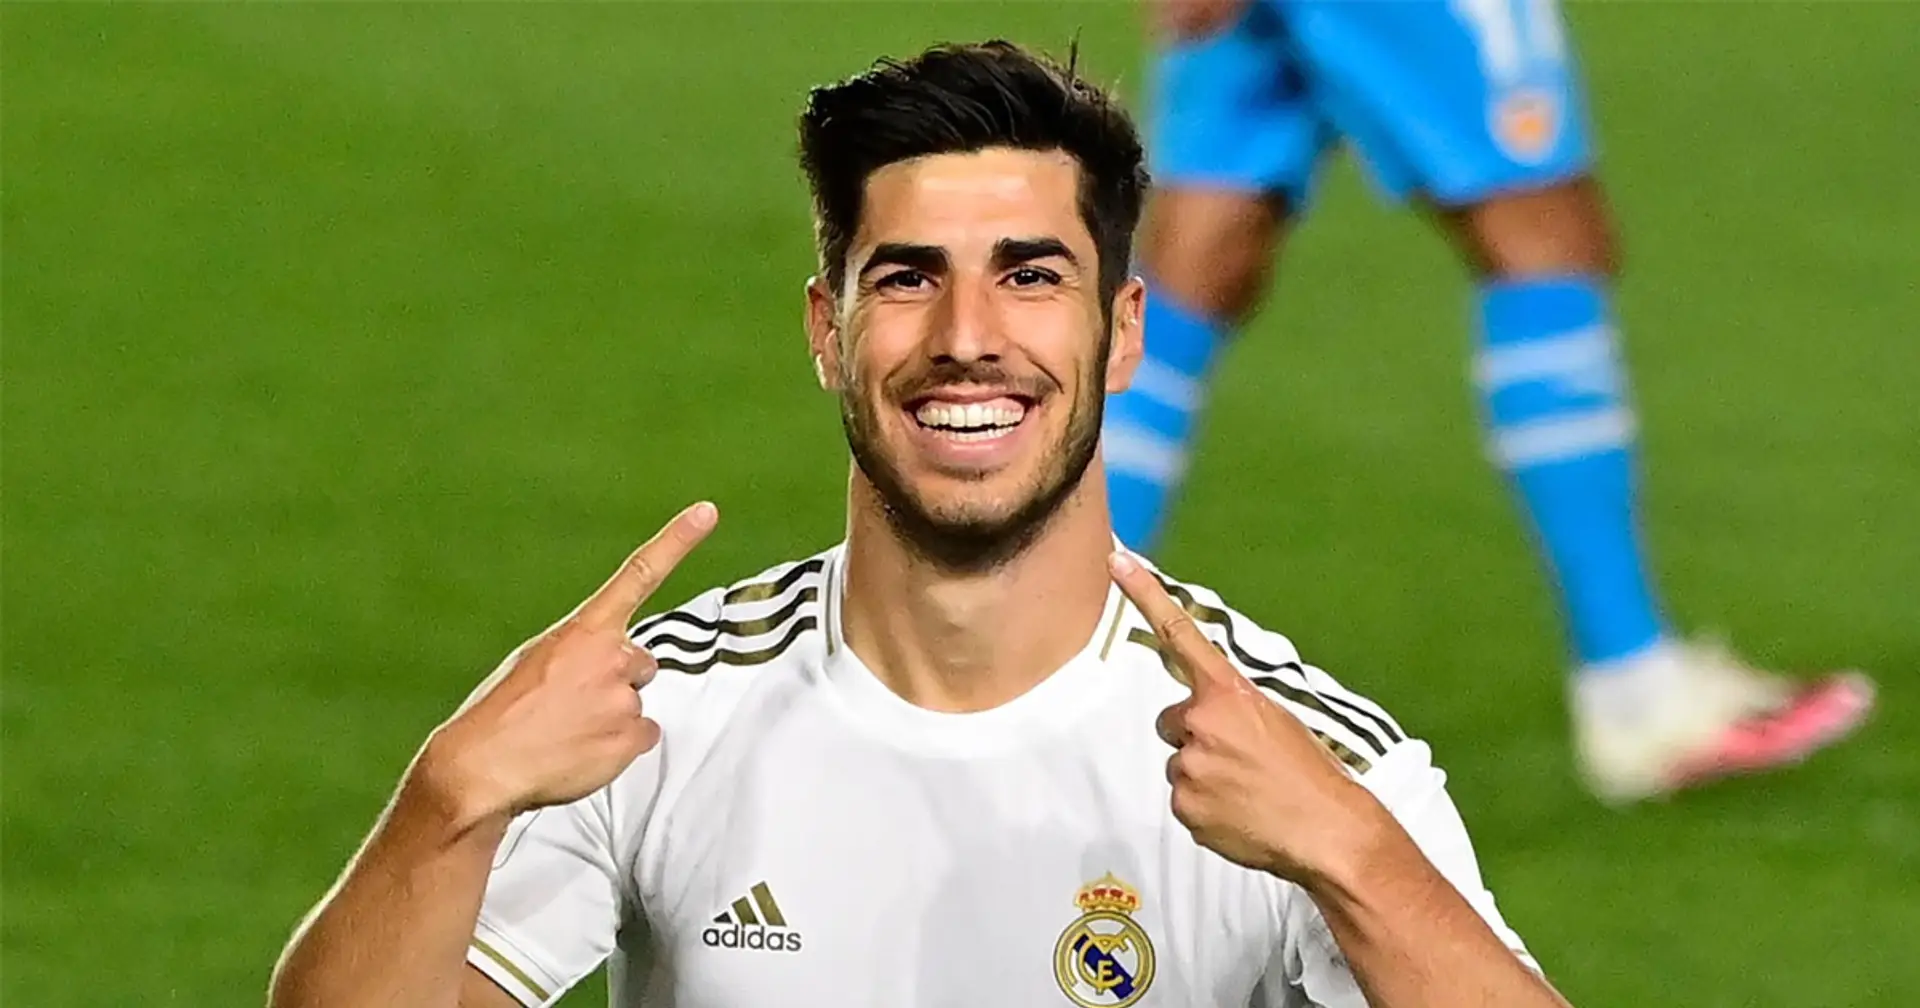 'Who knows, he could be the next Ronaldo': how Real Madrid fans reacted to Asensio arrival back in the day